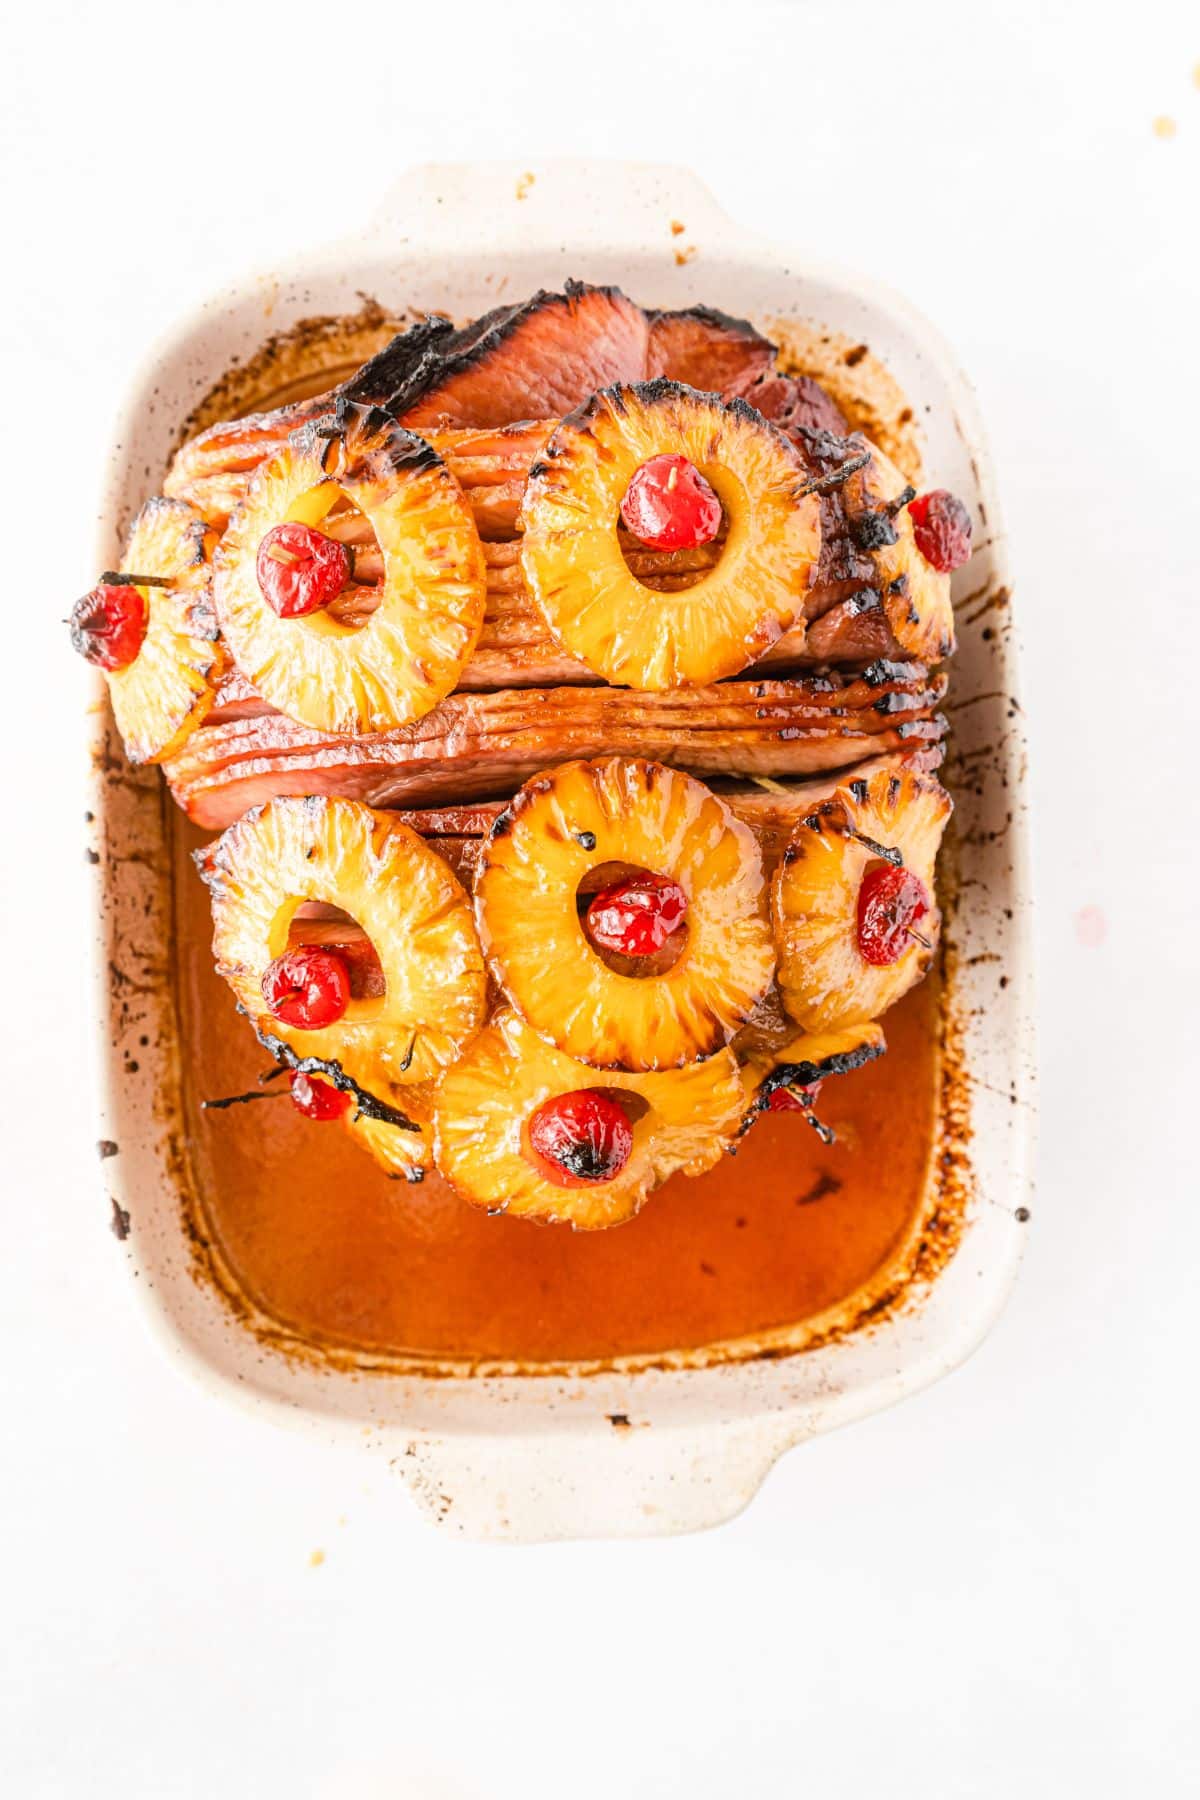 Baked ham with cherries and pineapples in a baking dish.